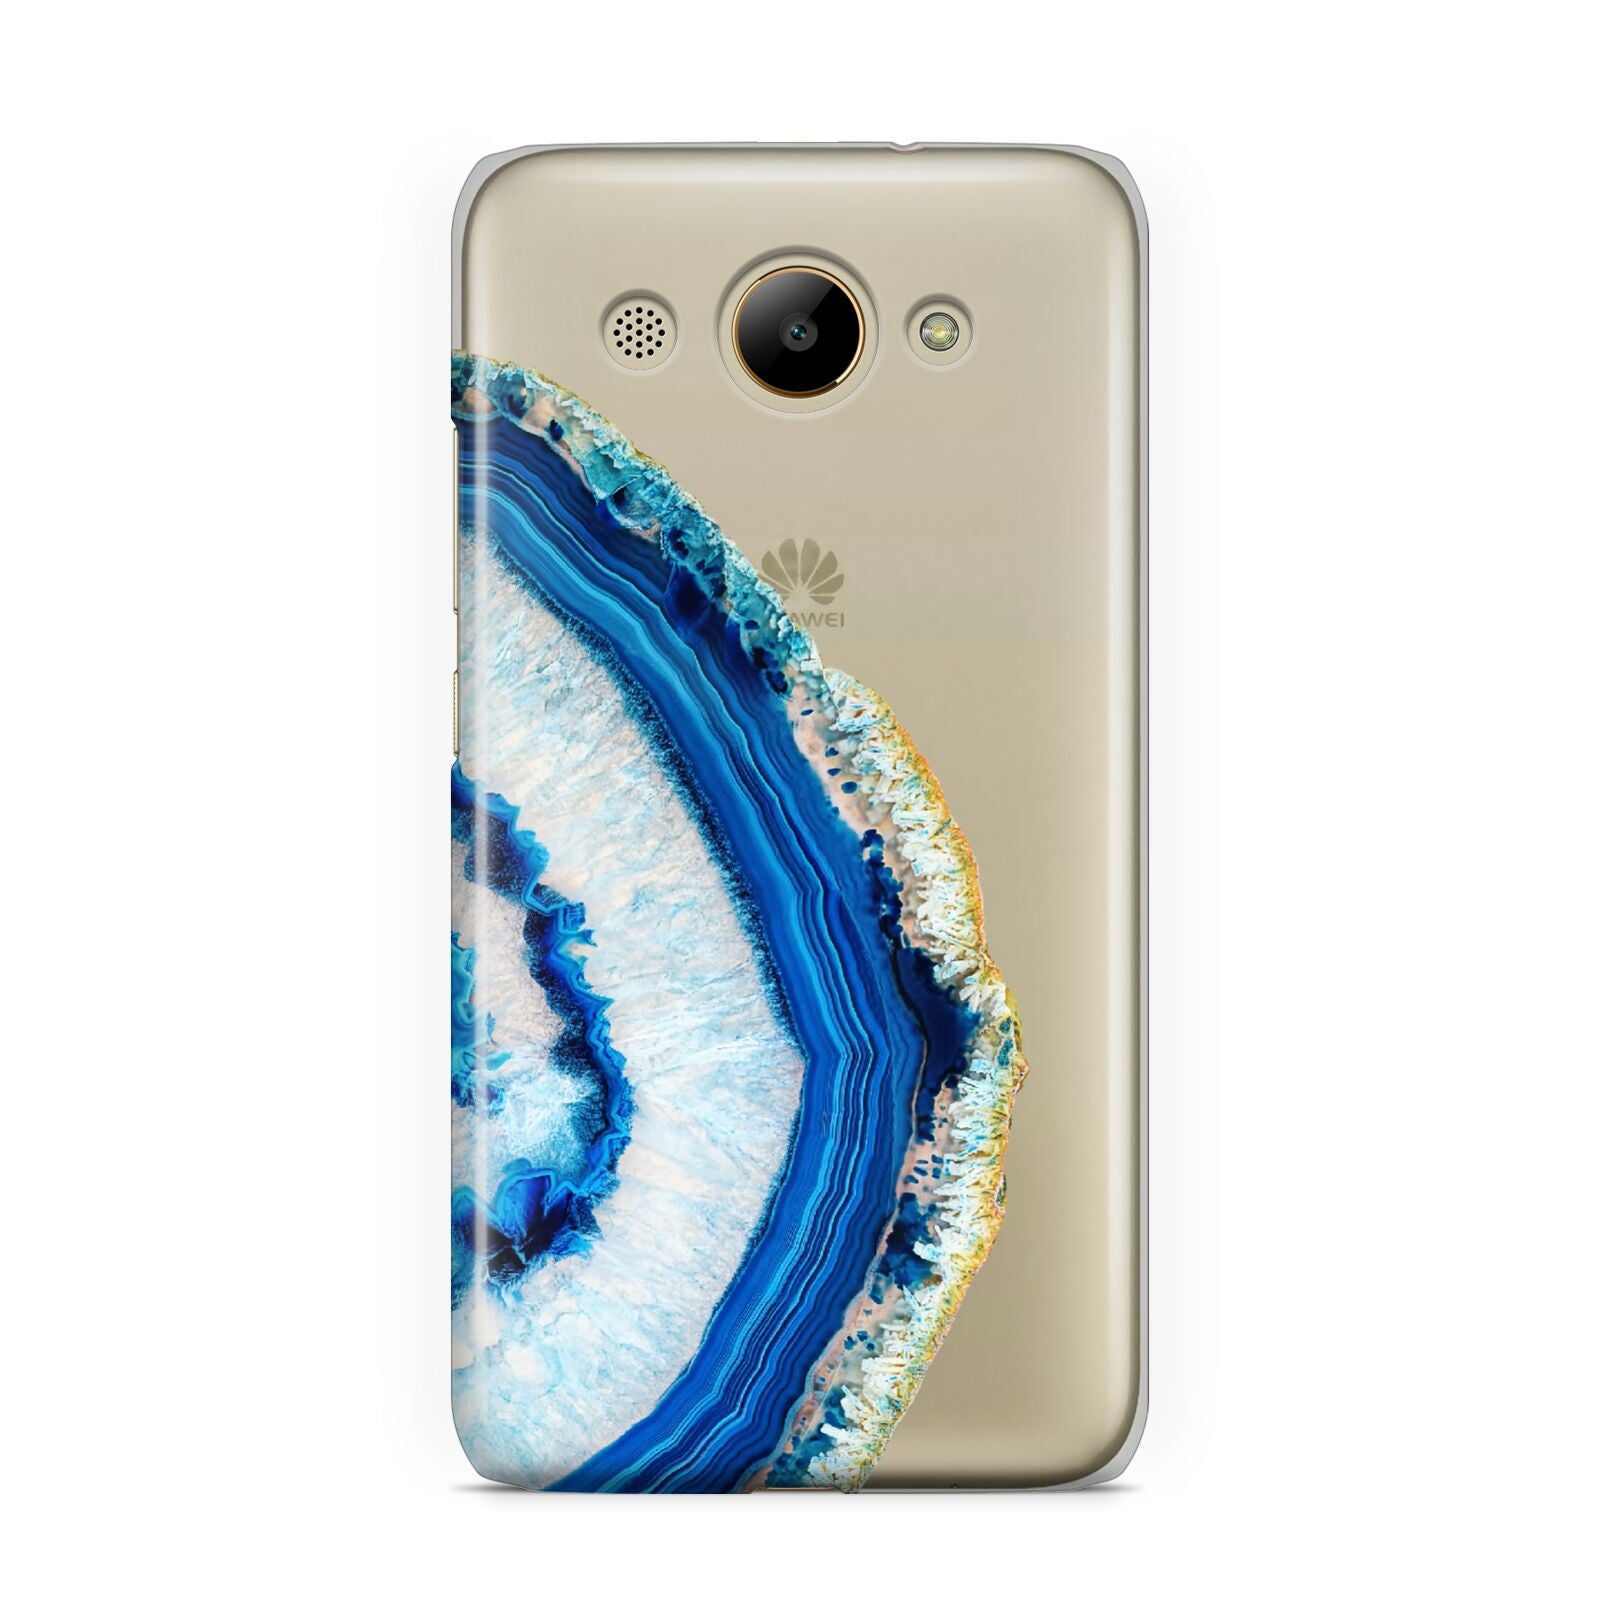 Agate Dark Blue and Turquoise Huawei Y3 2017